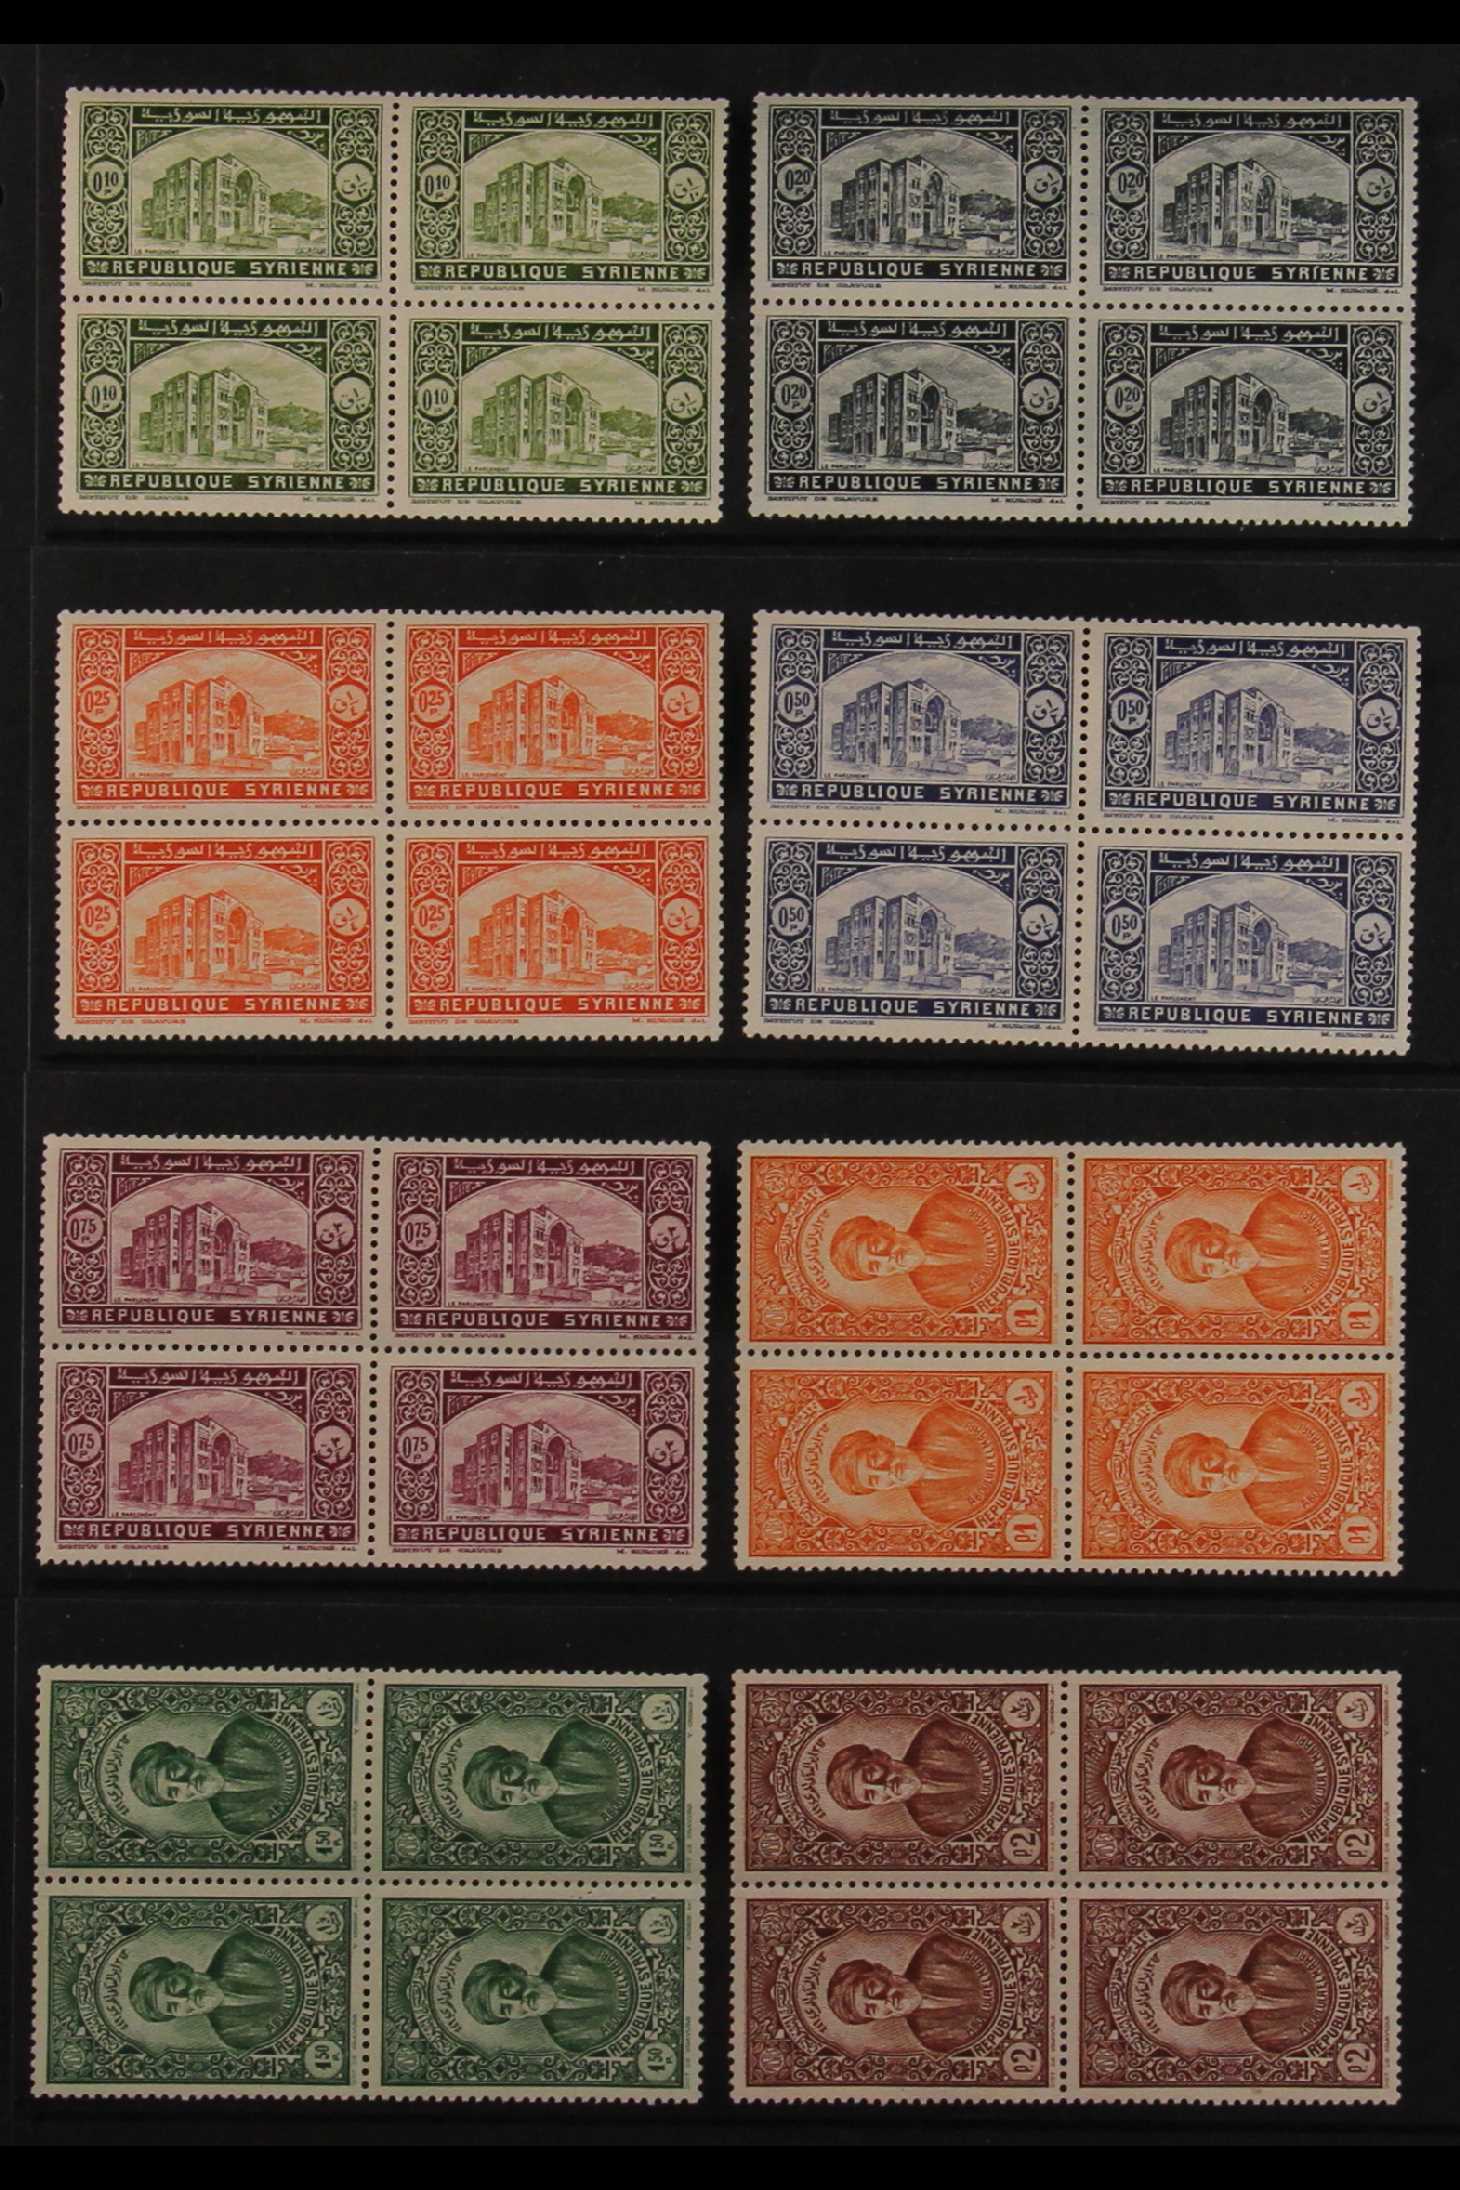 FRENCH COLONIES SYRIA 1934 Establishment of Republic complete set including Airs (SG 271/89 & 290/ - Image 3 of 4